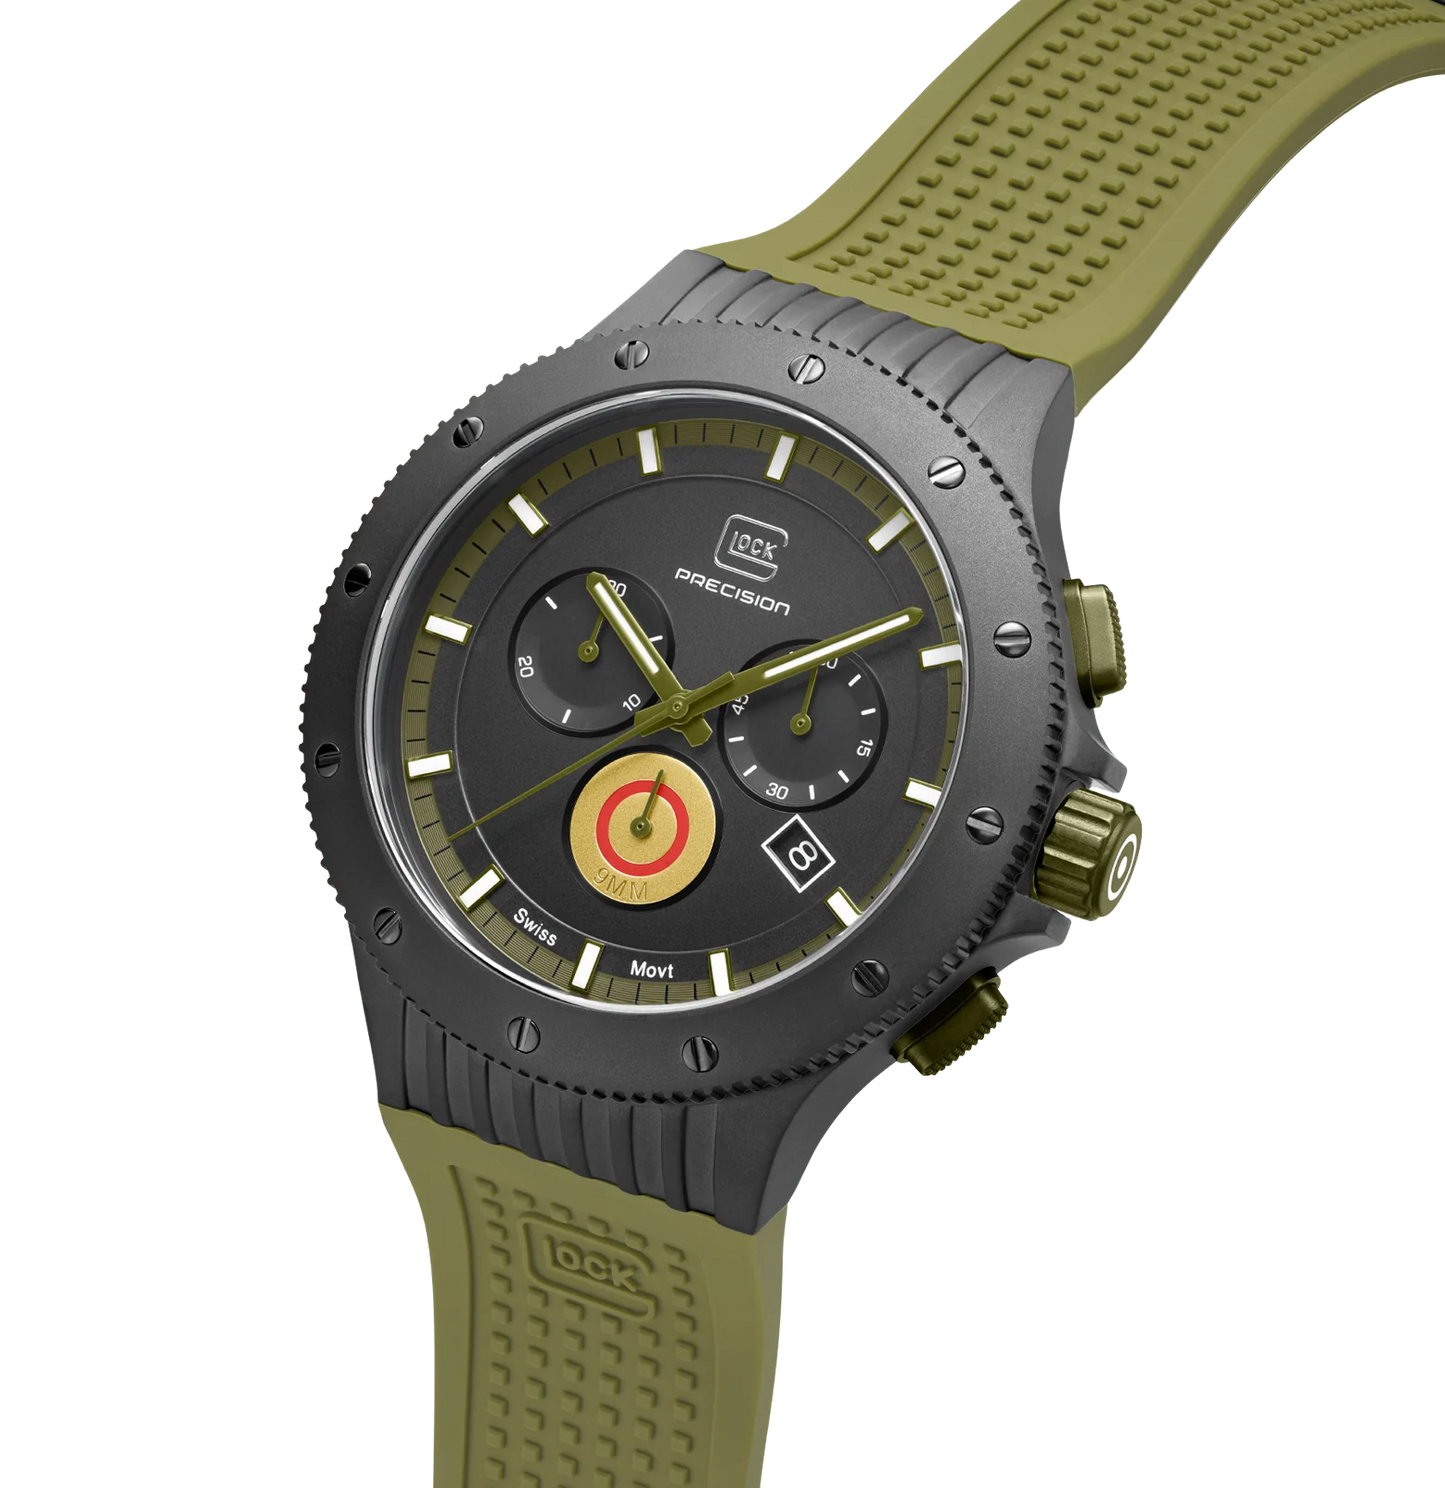 Men's Limited-Edition Glock Watch in Black/ Army Green with 2 Straps